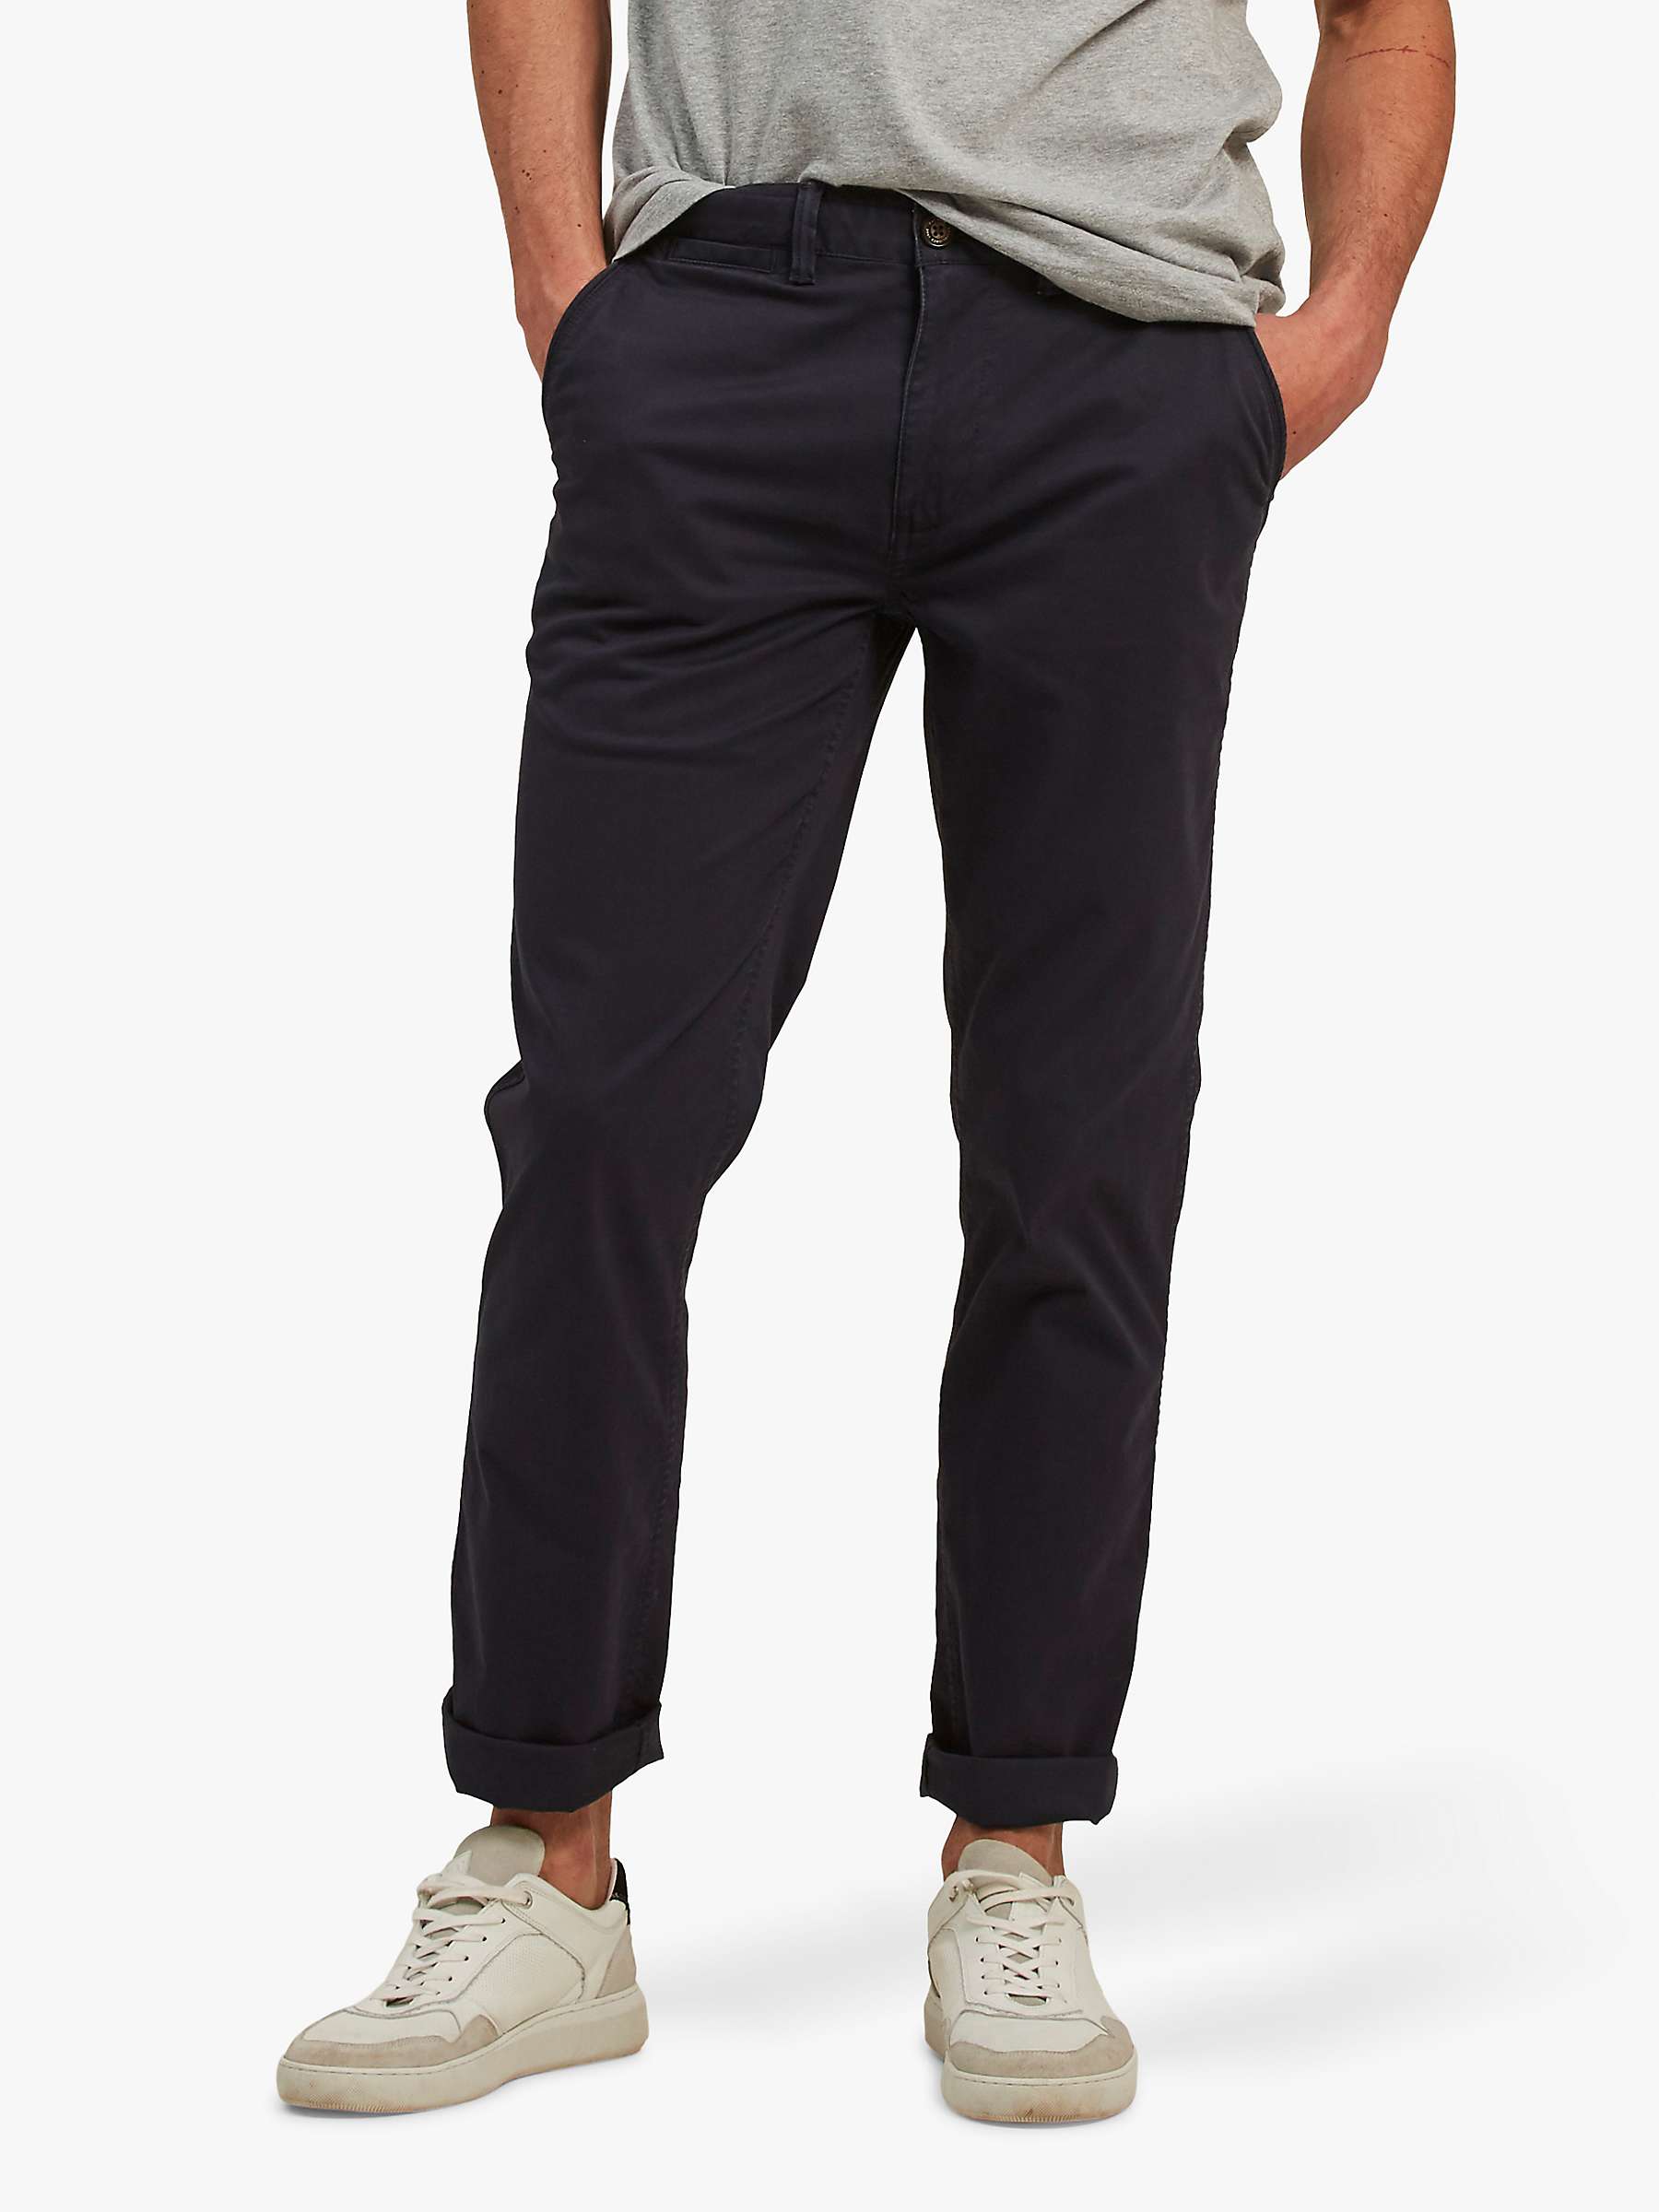 Buy FatFace Slim Chinos, Navy Online at johnlewis.com